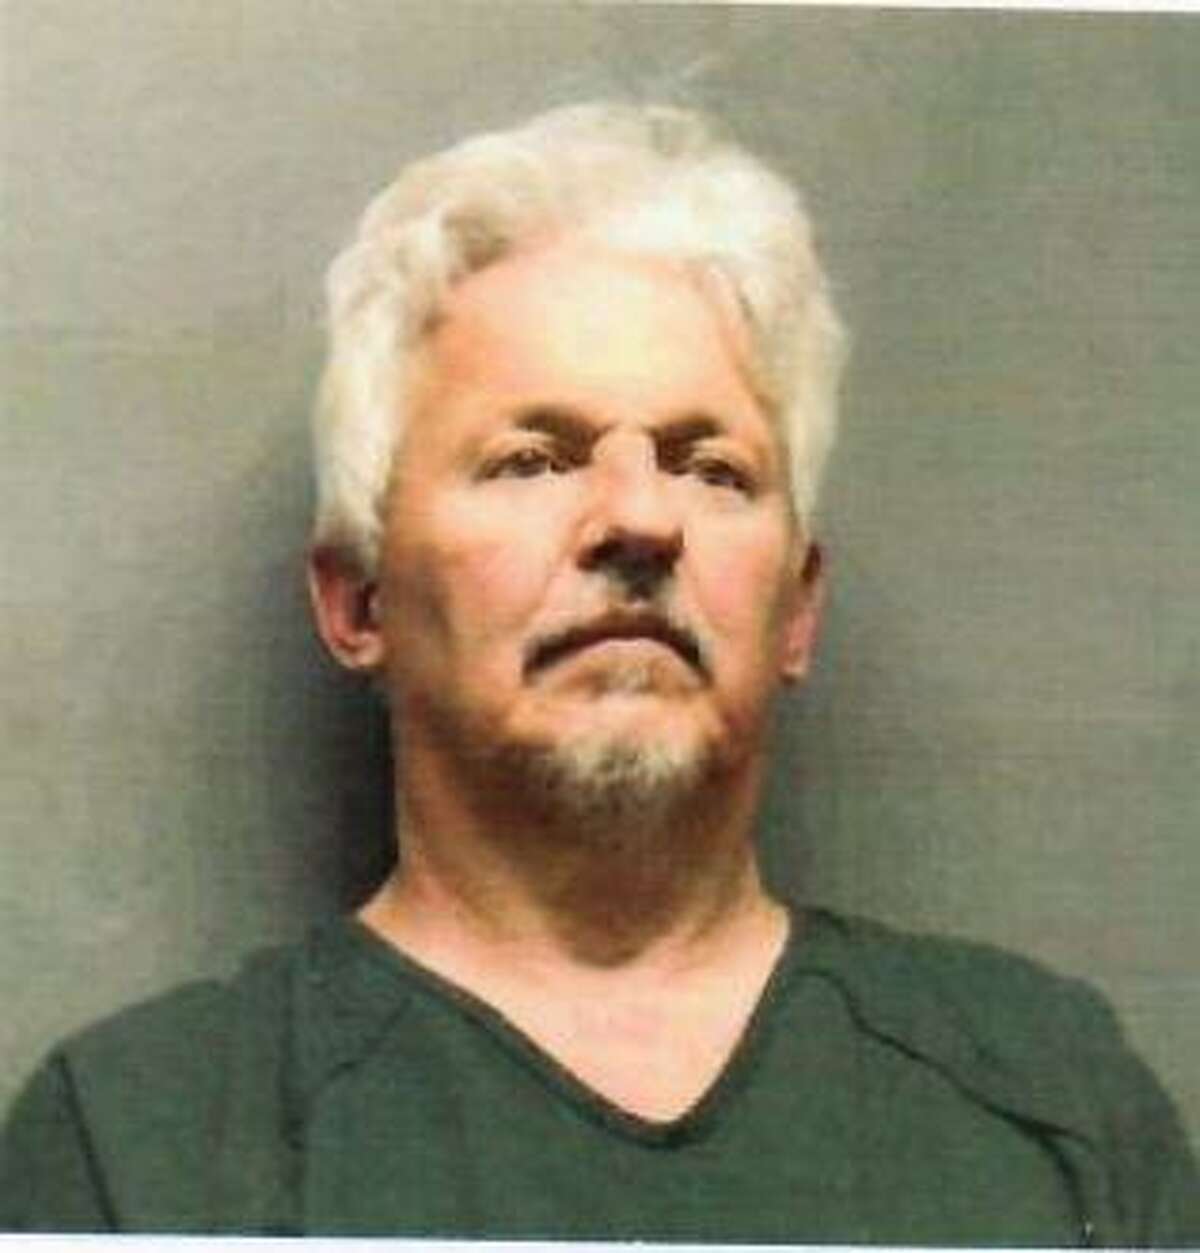 Eric Lee Elliott, 70, was charged with murder in the fatal shooting of his 60-year-old neighbor, William Duncan Womack. The incident stemmed from an ongoing dispute over Womack’s dog.